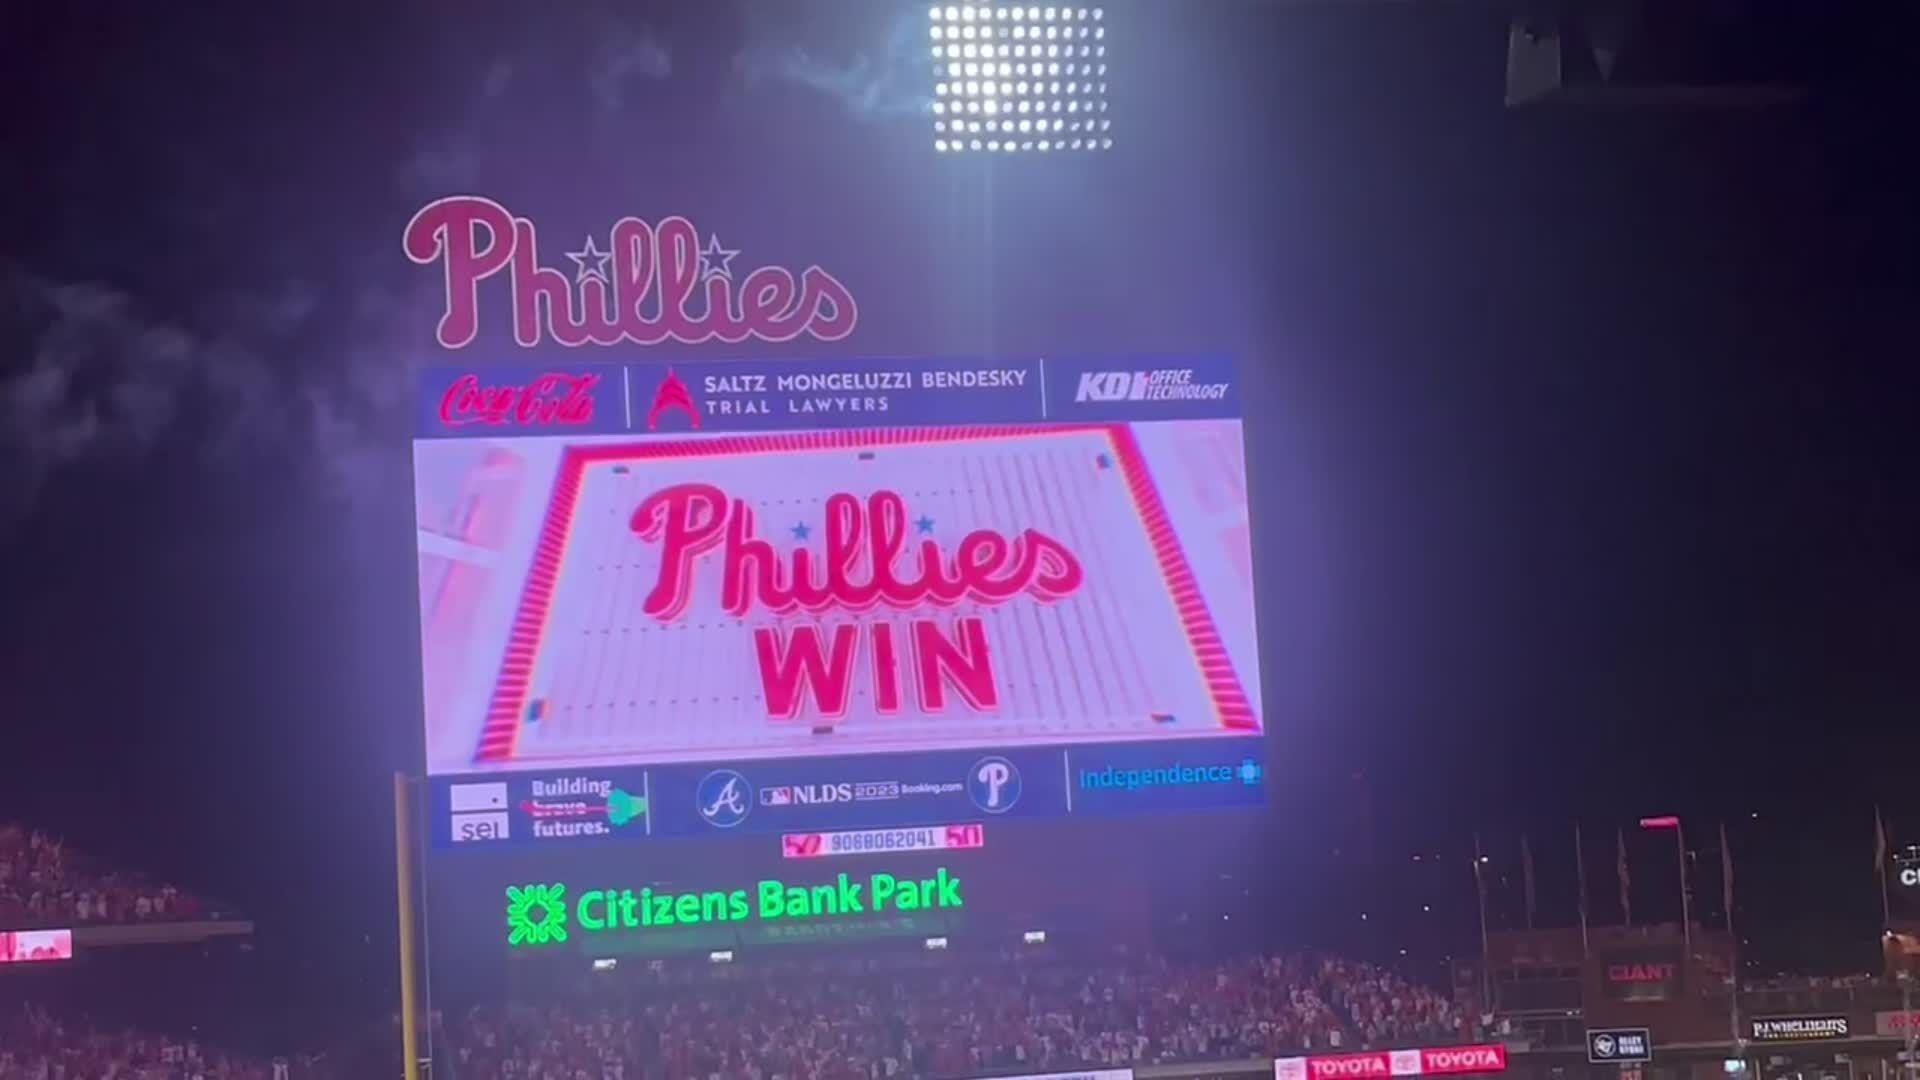 José Alvarado pitching with heavy heart without full family together for  postseason  Phillies Nation - Your source for Philadelphia Phillies news,  opinion, history, rumors, events, and other fun stuff.